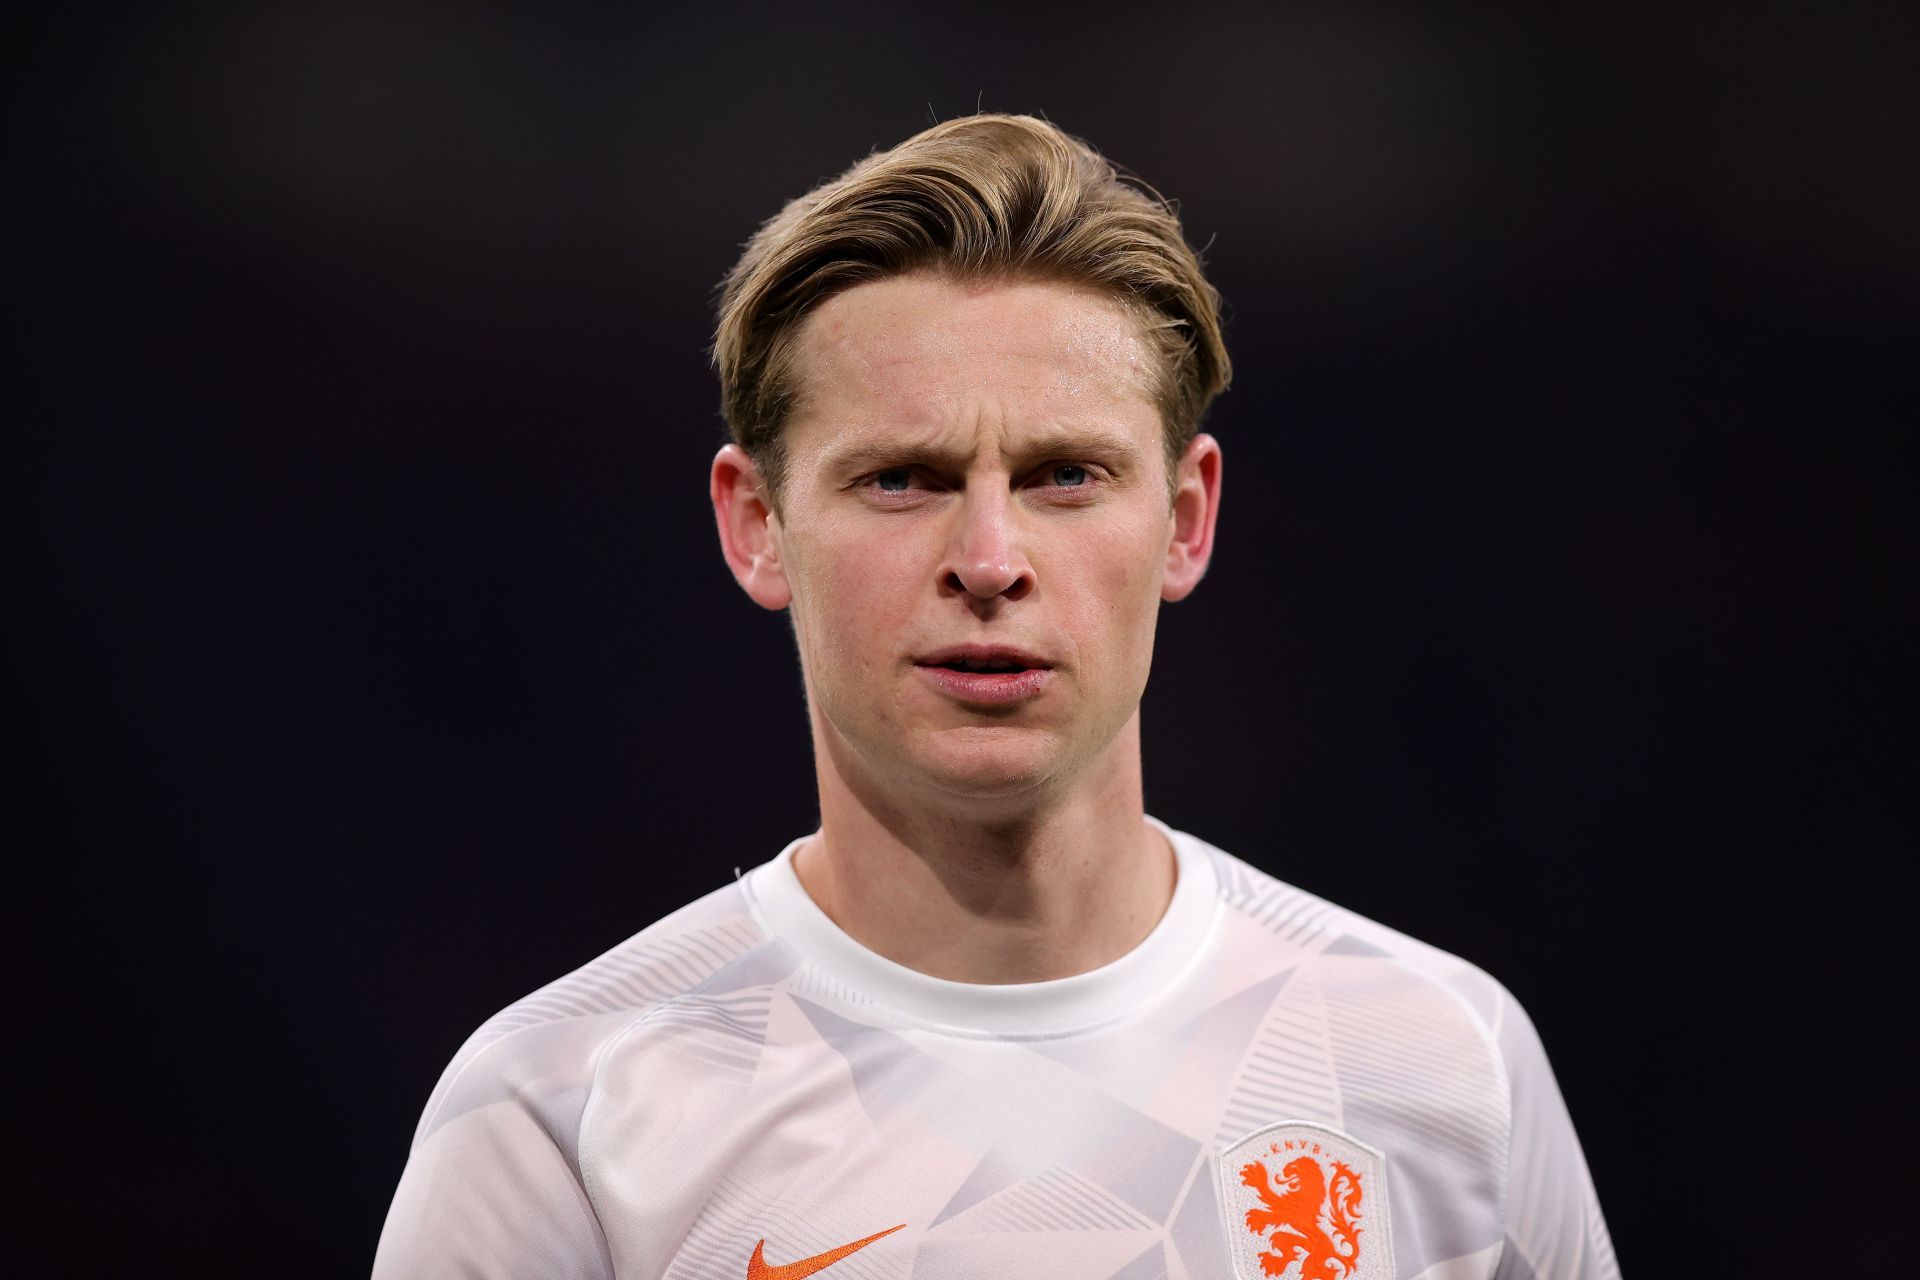 Frenkie de Jong is one of the most talented young midfielders in the world.